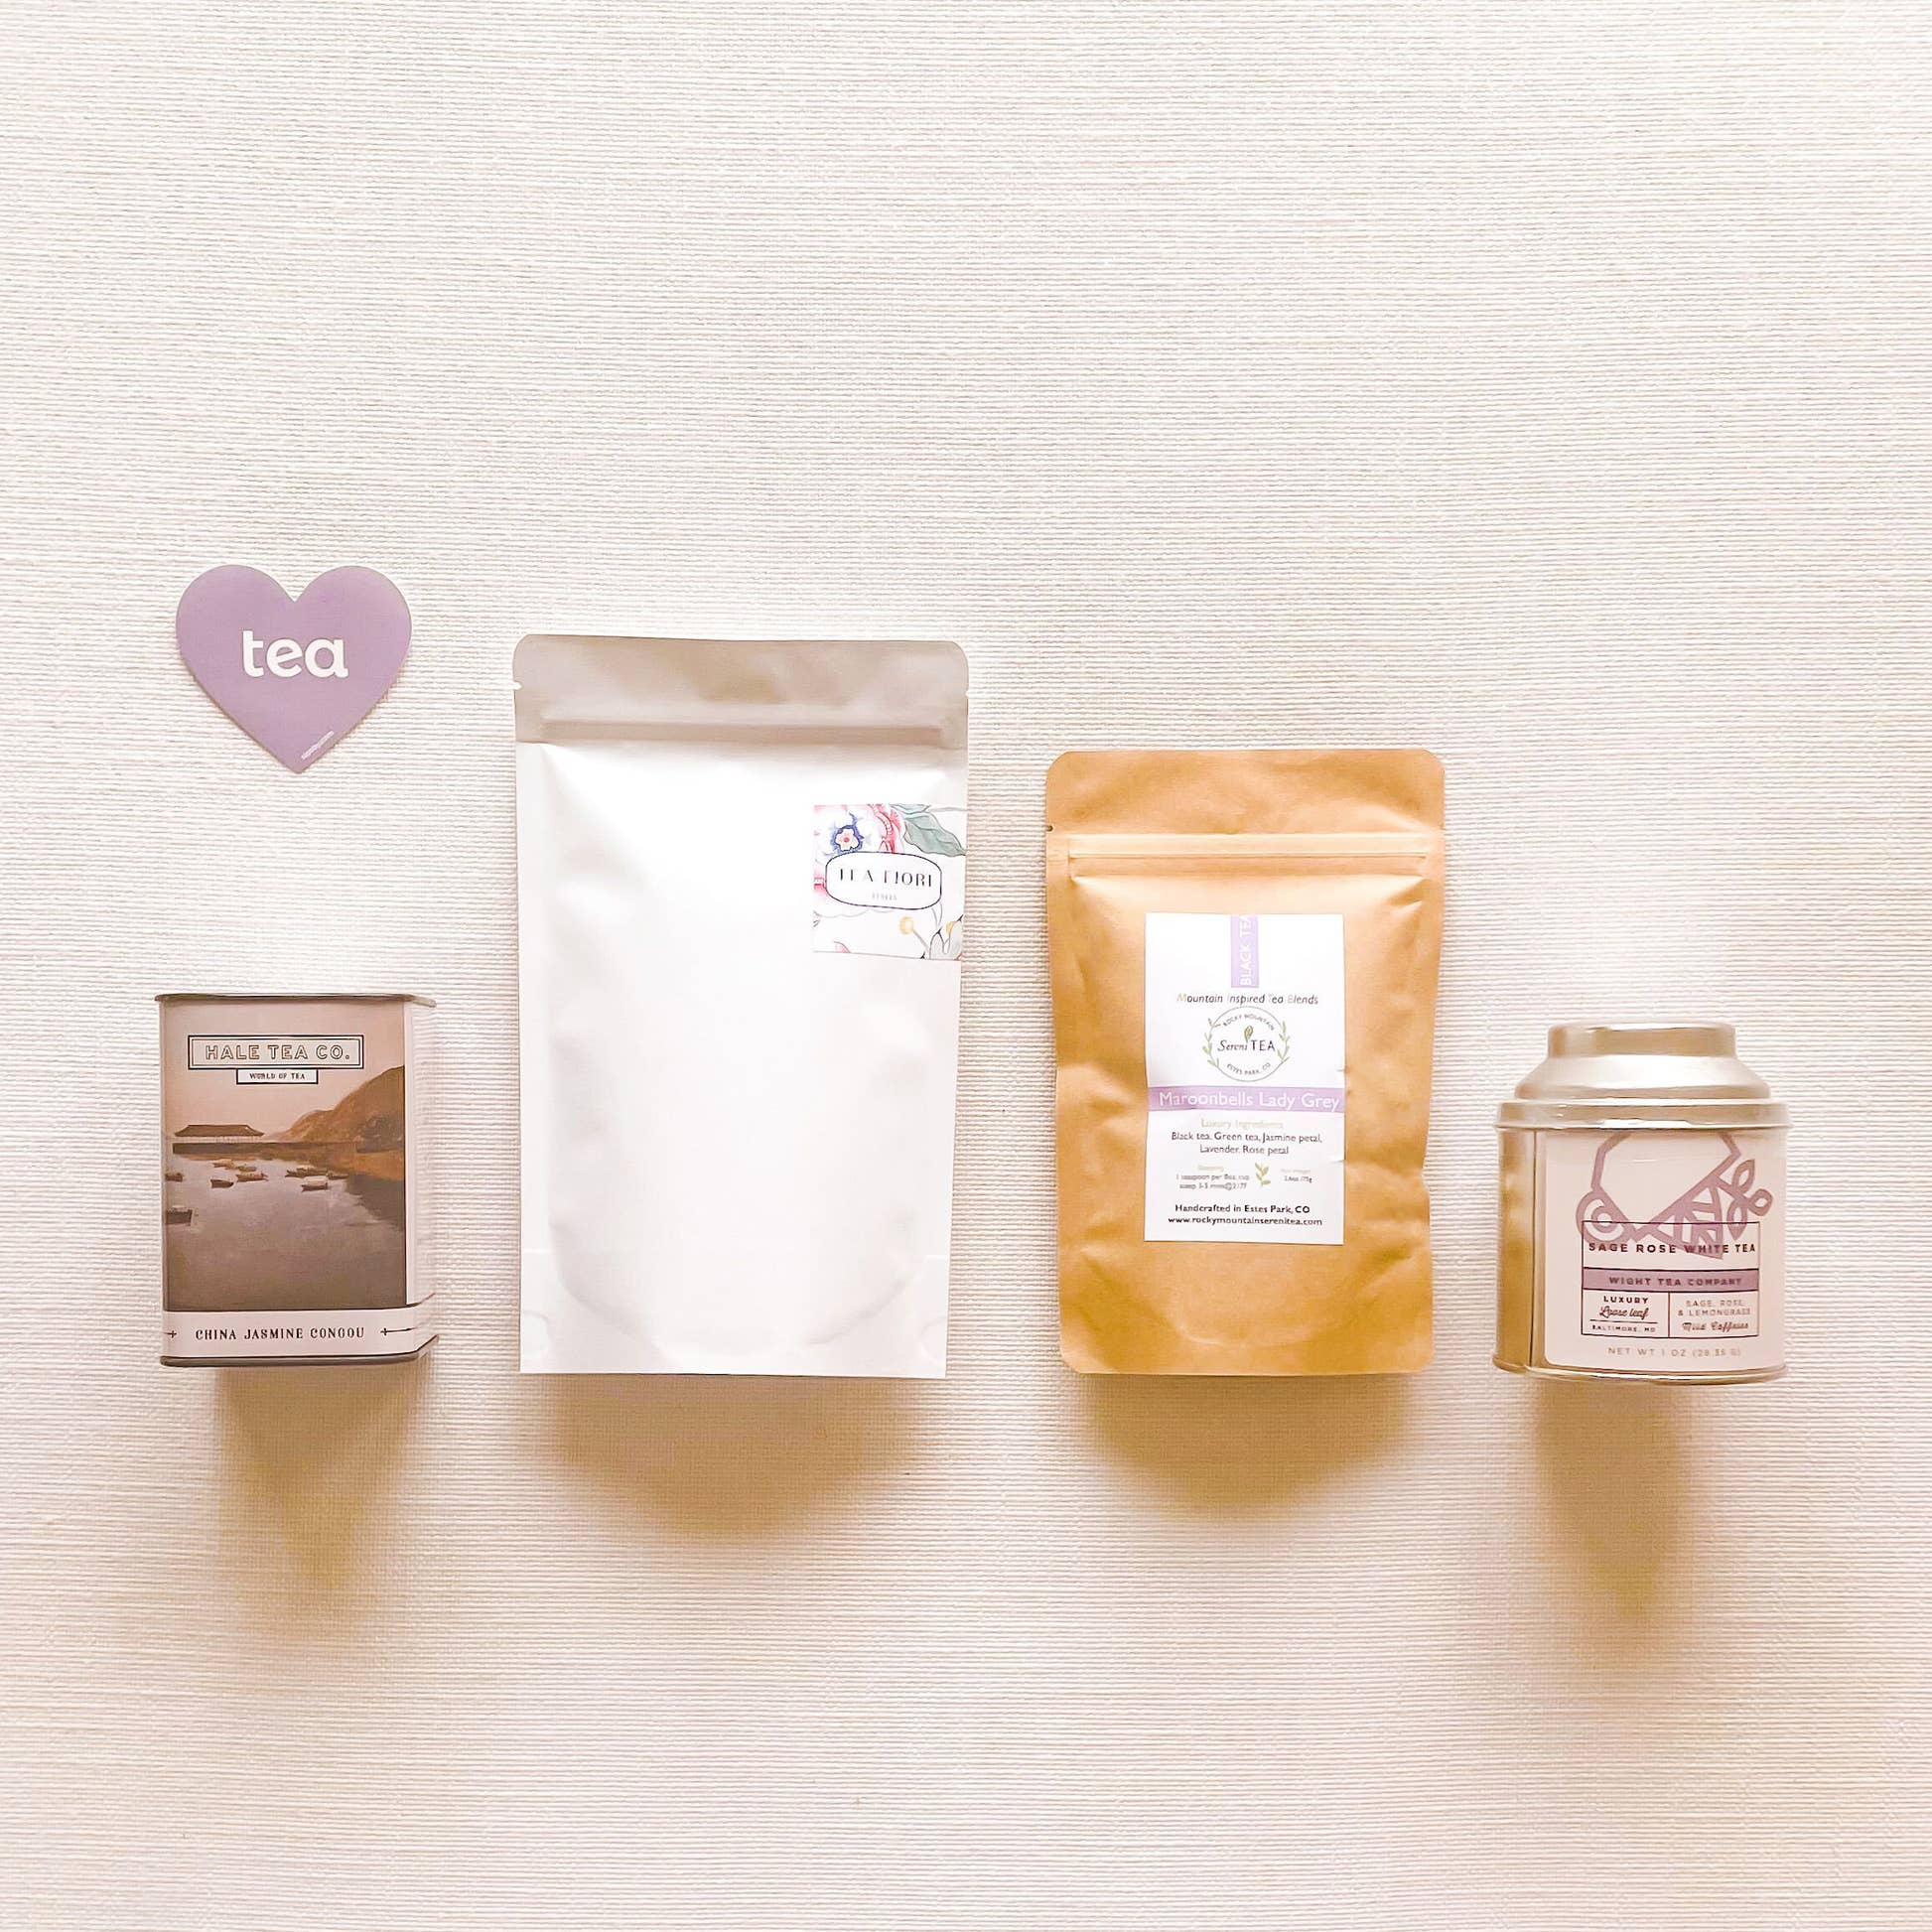 Floral Tea Collection of four full-sized floral loose leaf teas and purple heart tea sticker